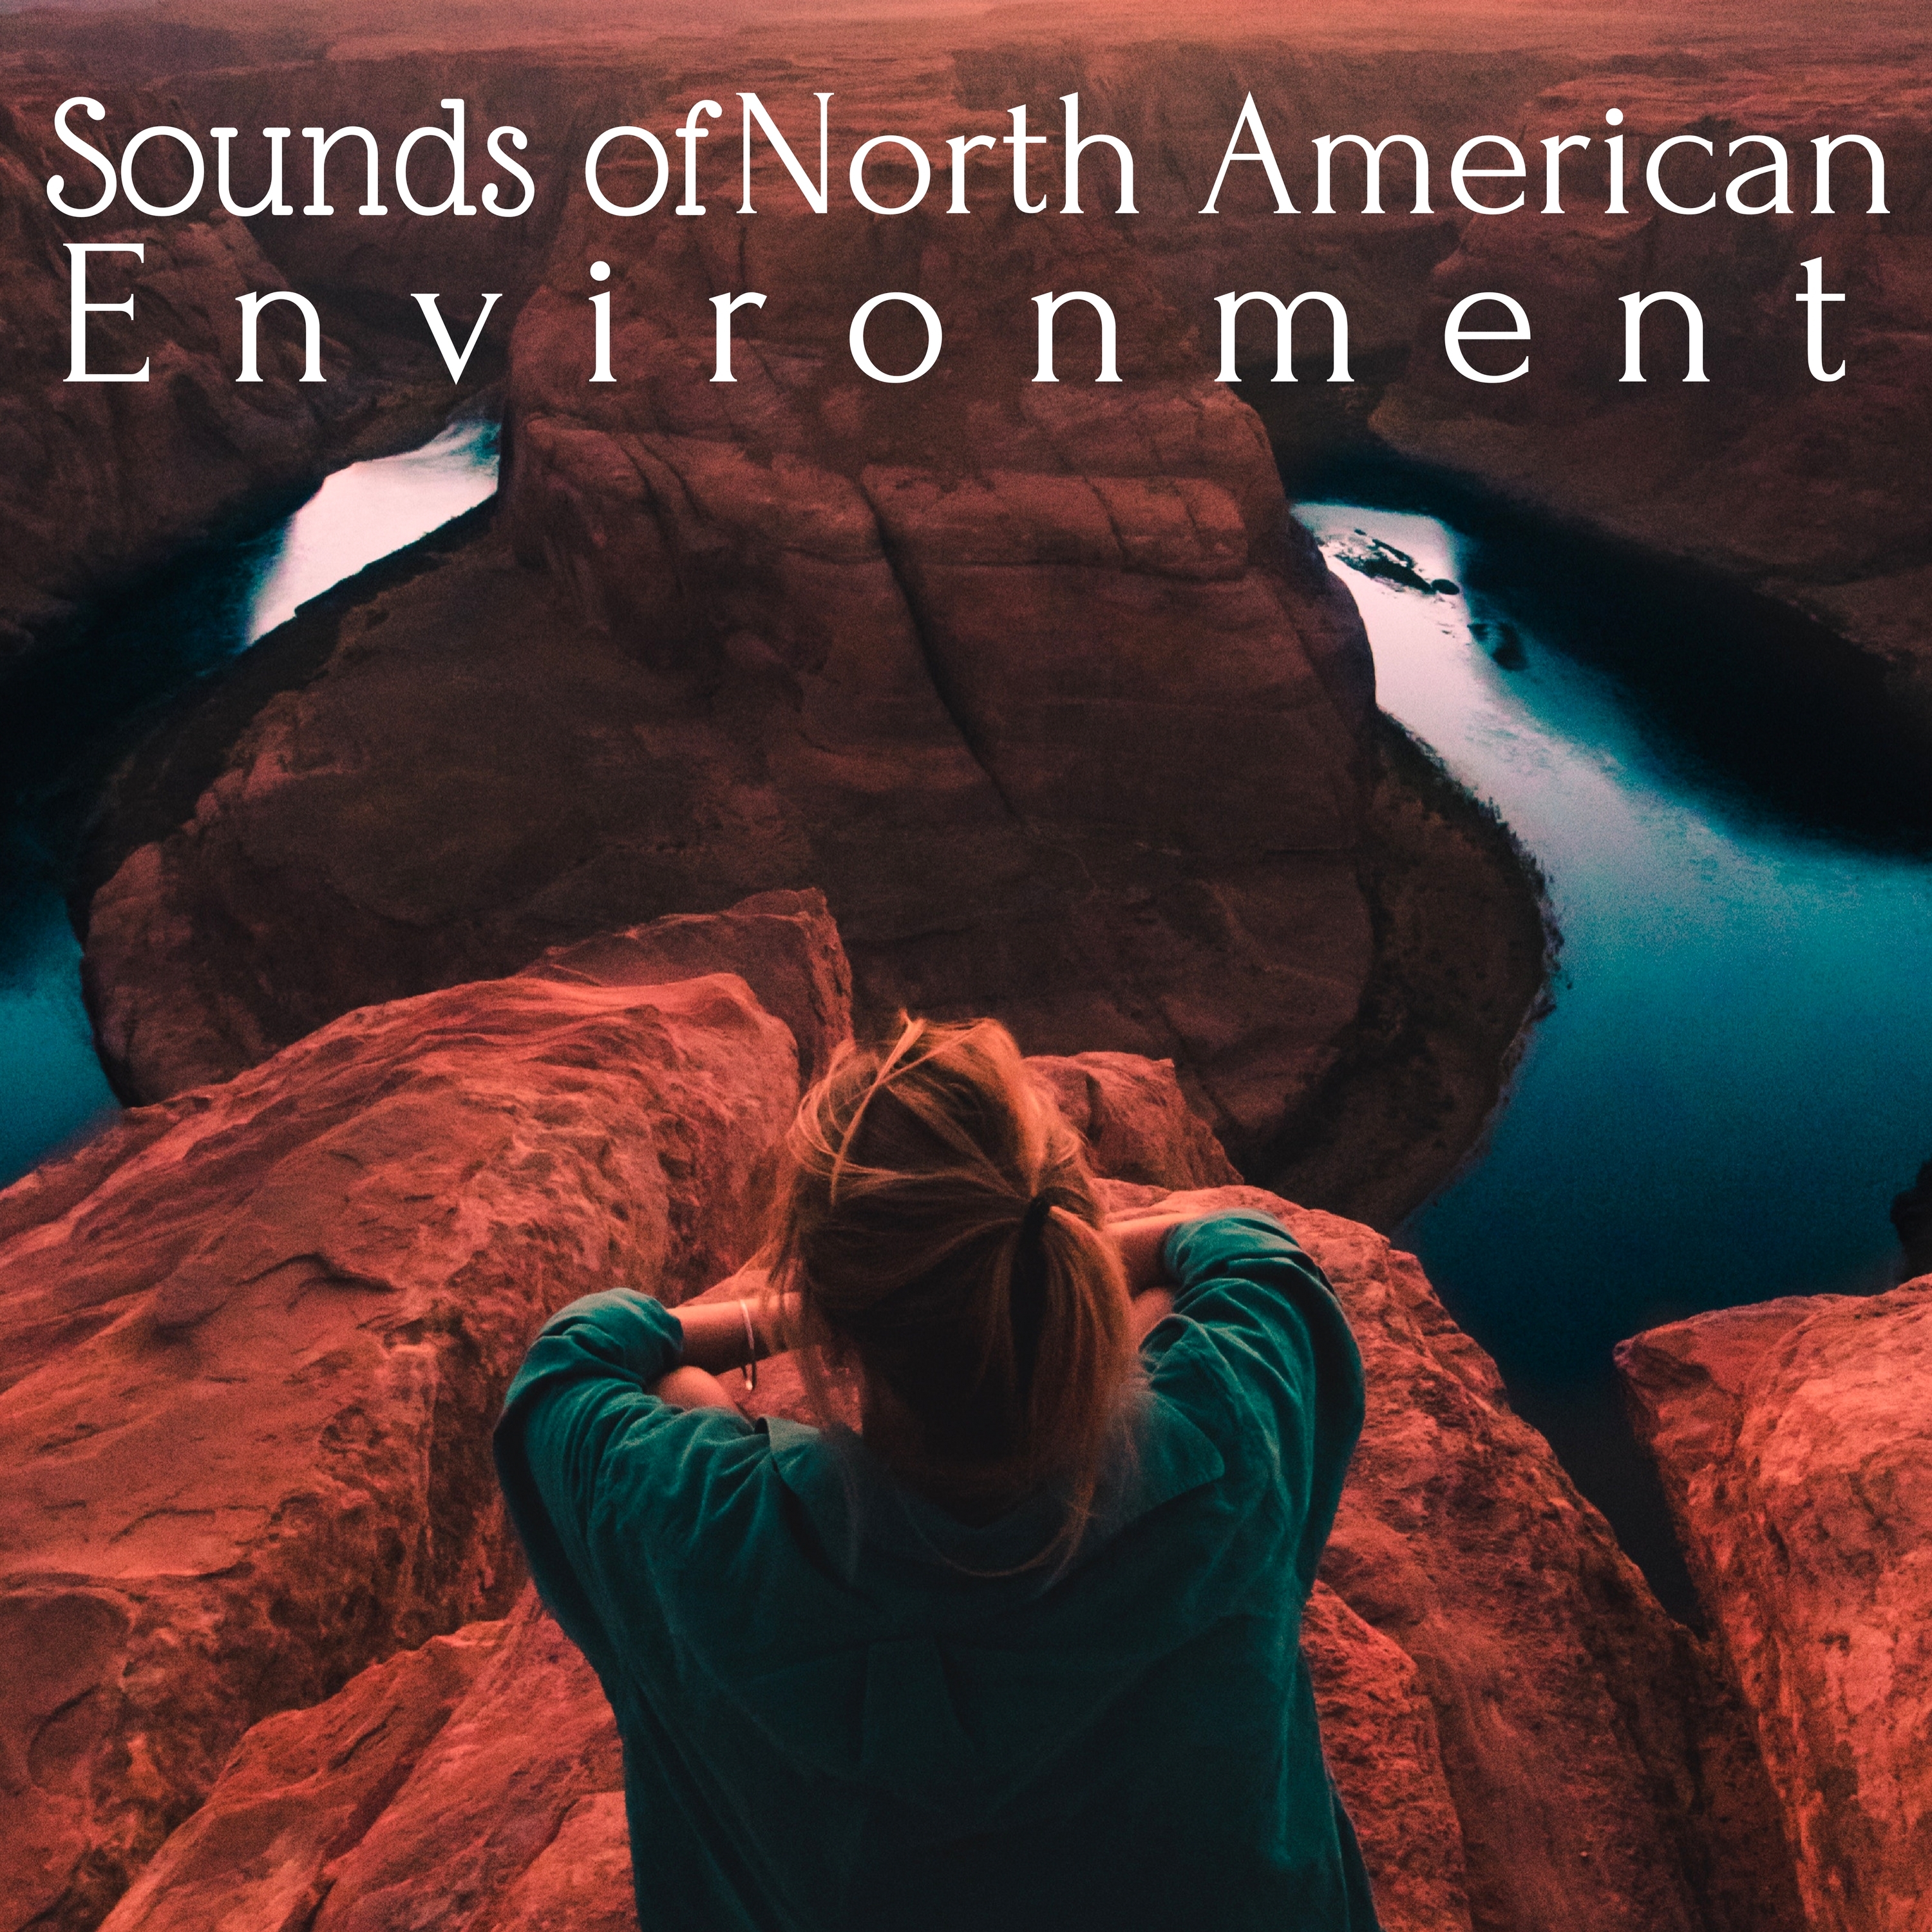 Sounds of North American Environment - New Age Music with Nature, Birds, Frogs, Rain, Wind